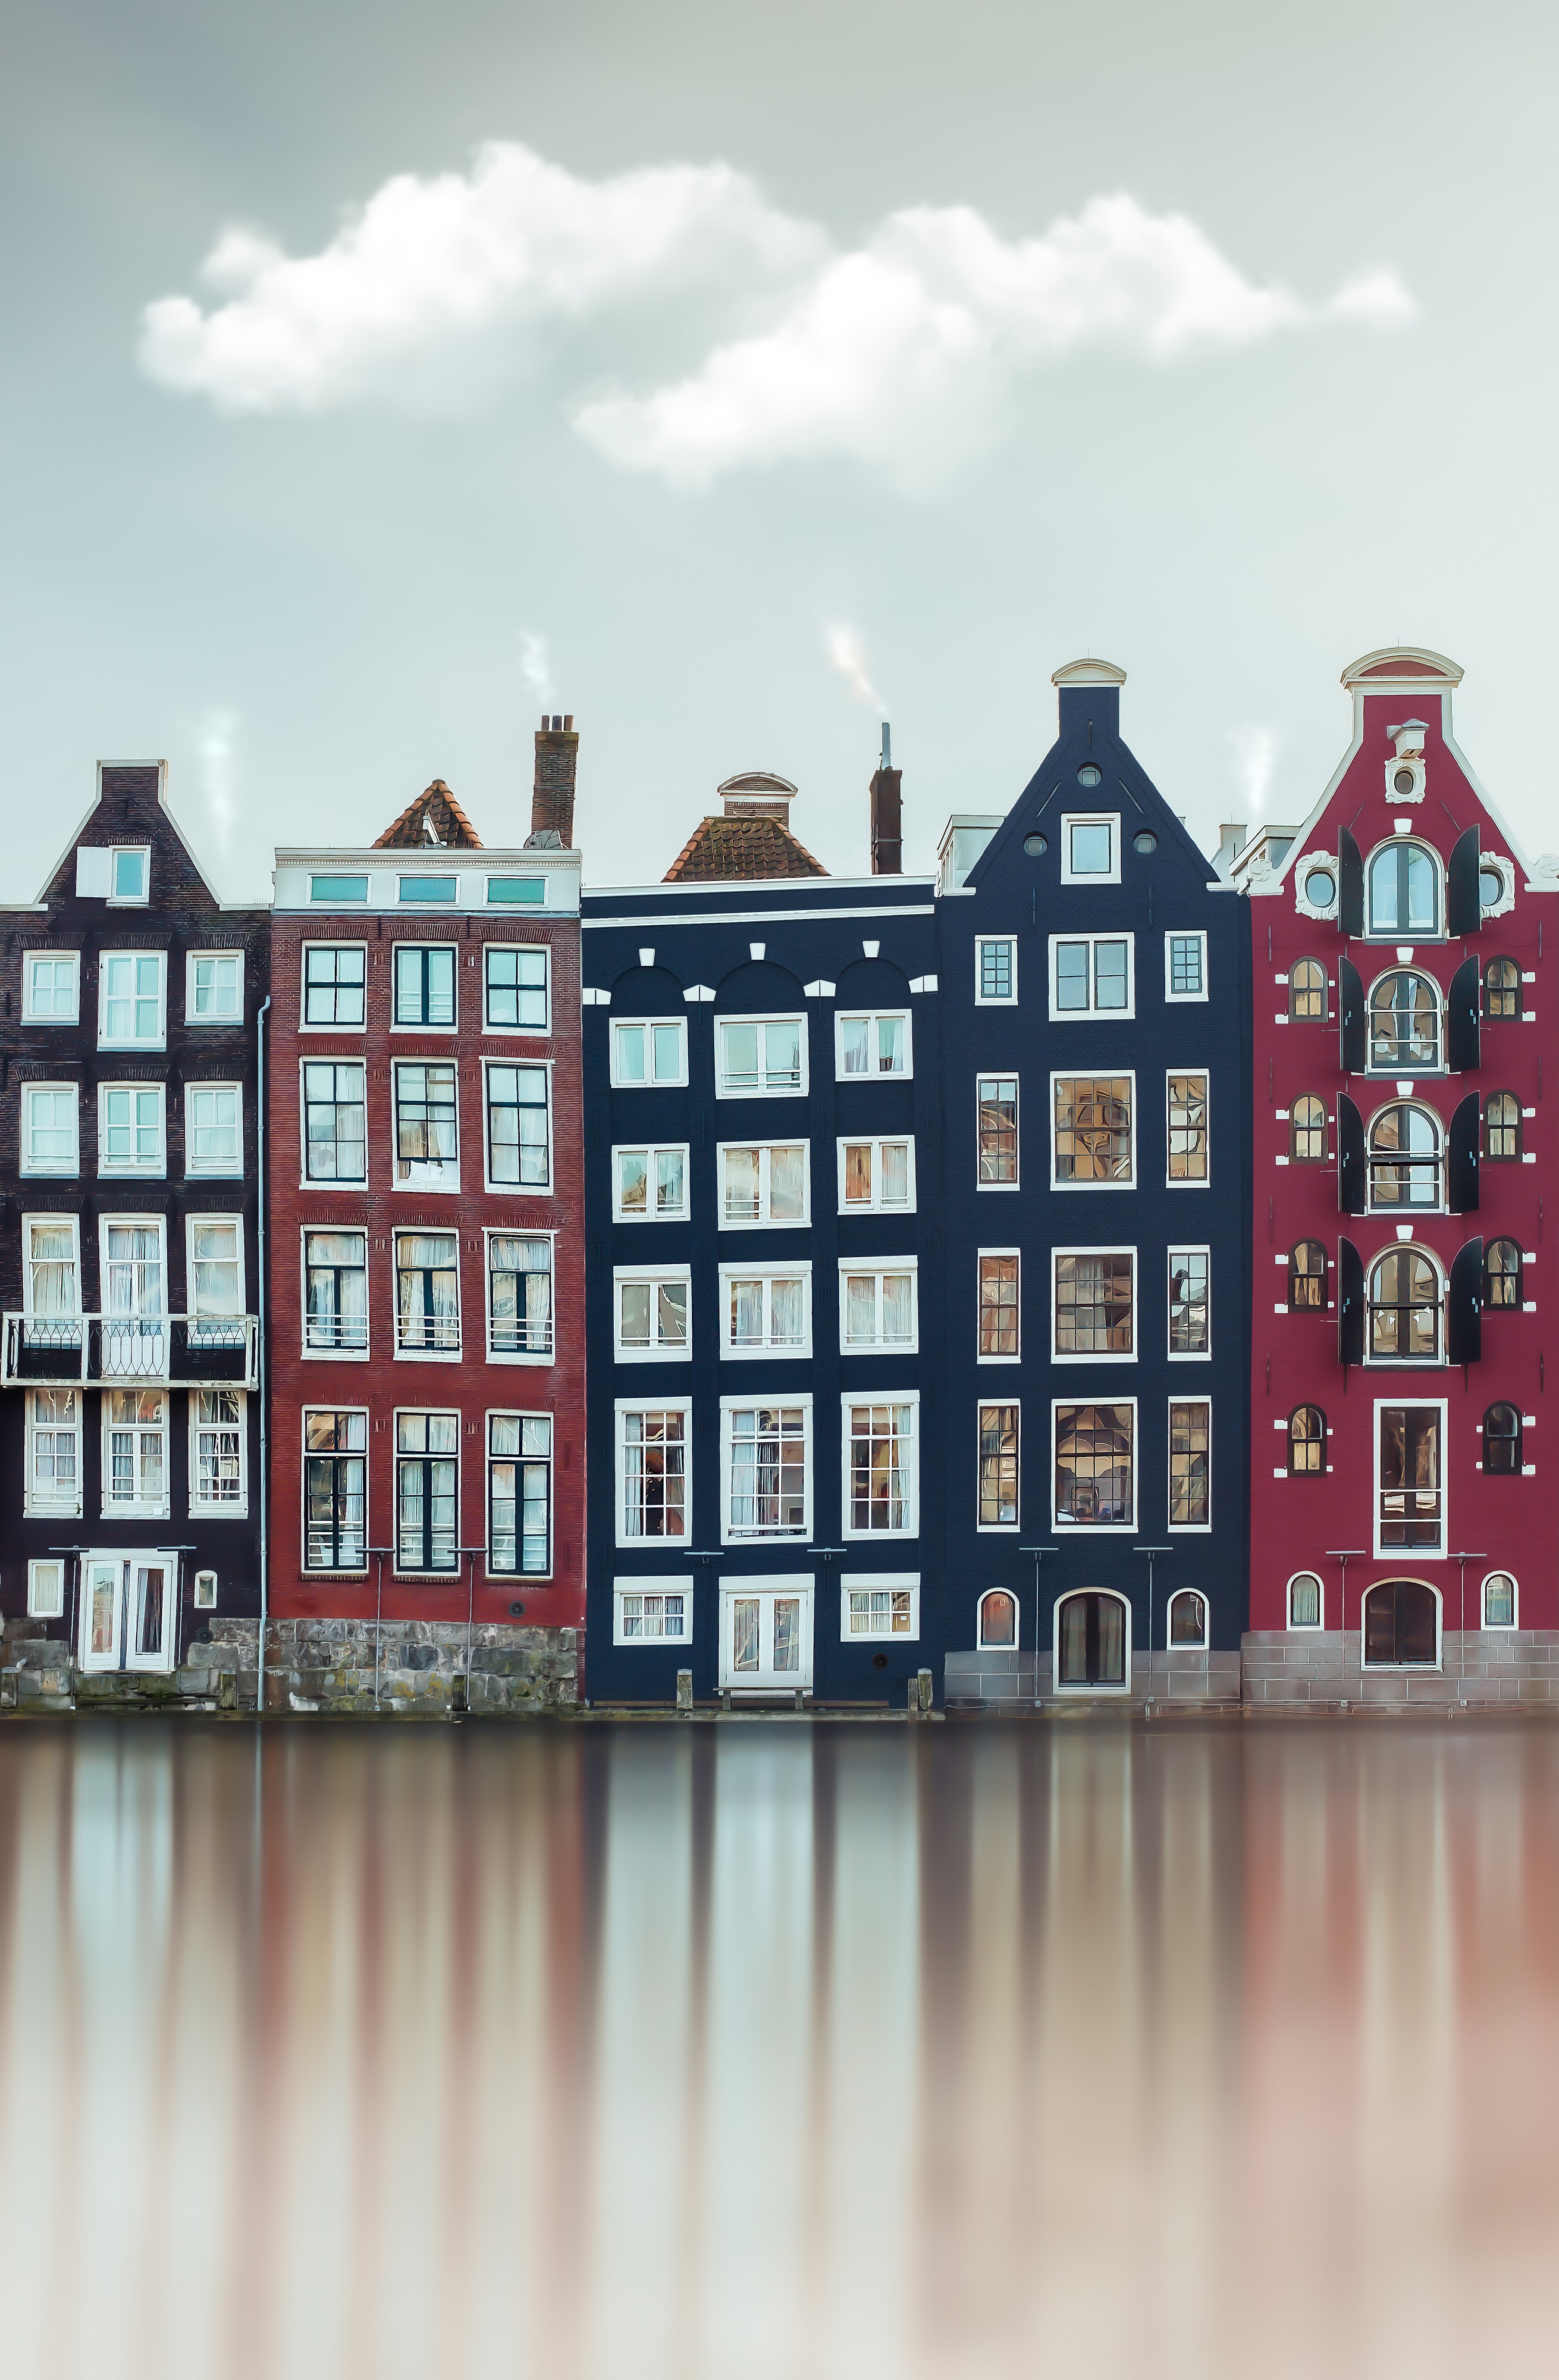 Wallpaper Full HD cities, water, houses, rivers, city, building, facade